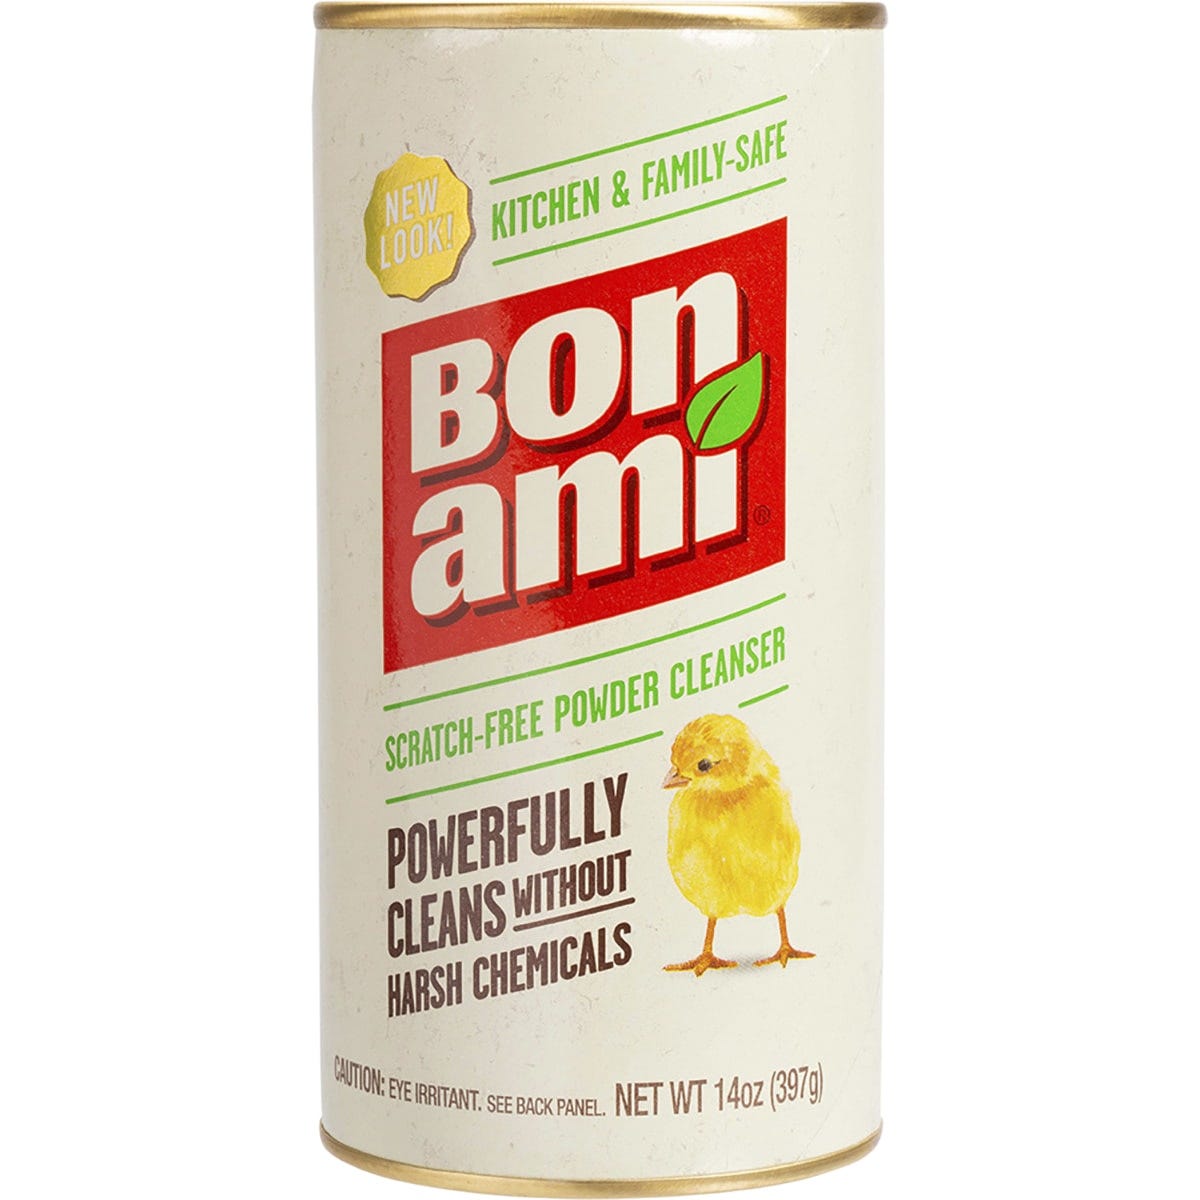 Bon Ami Powder Cleanser Natural Home Cleaner 400g - Dr Earth - Cleaning